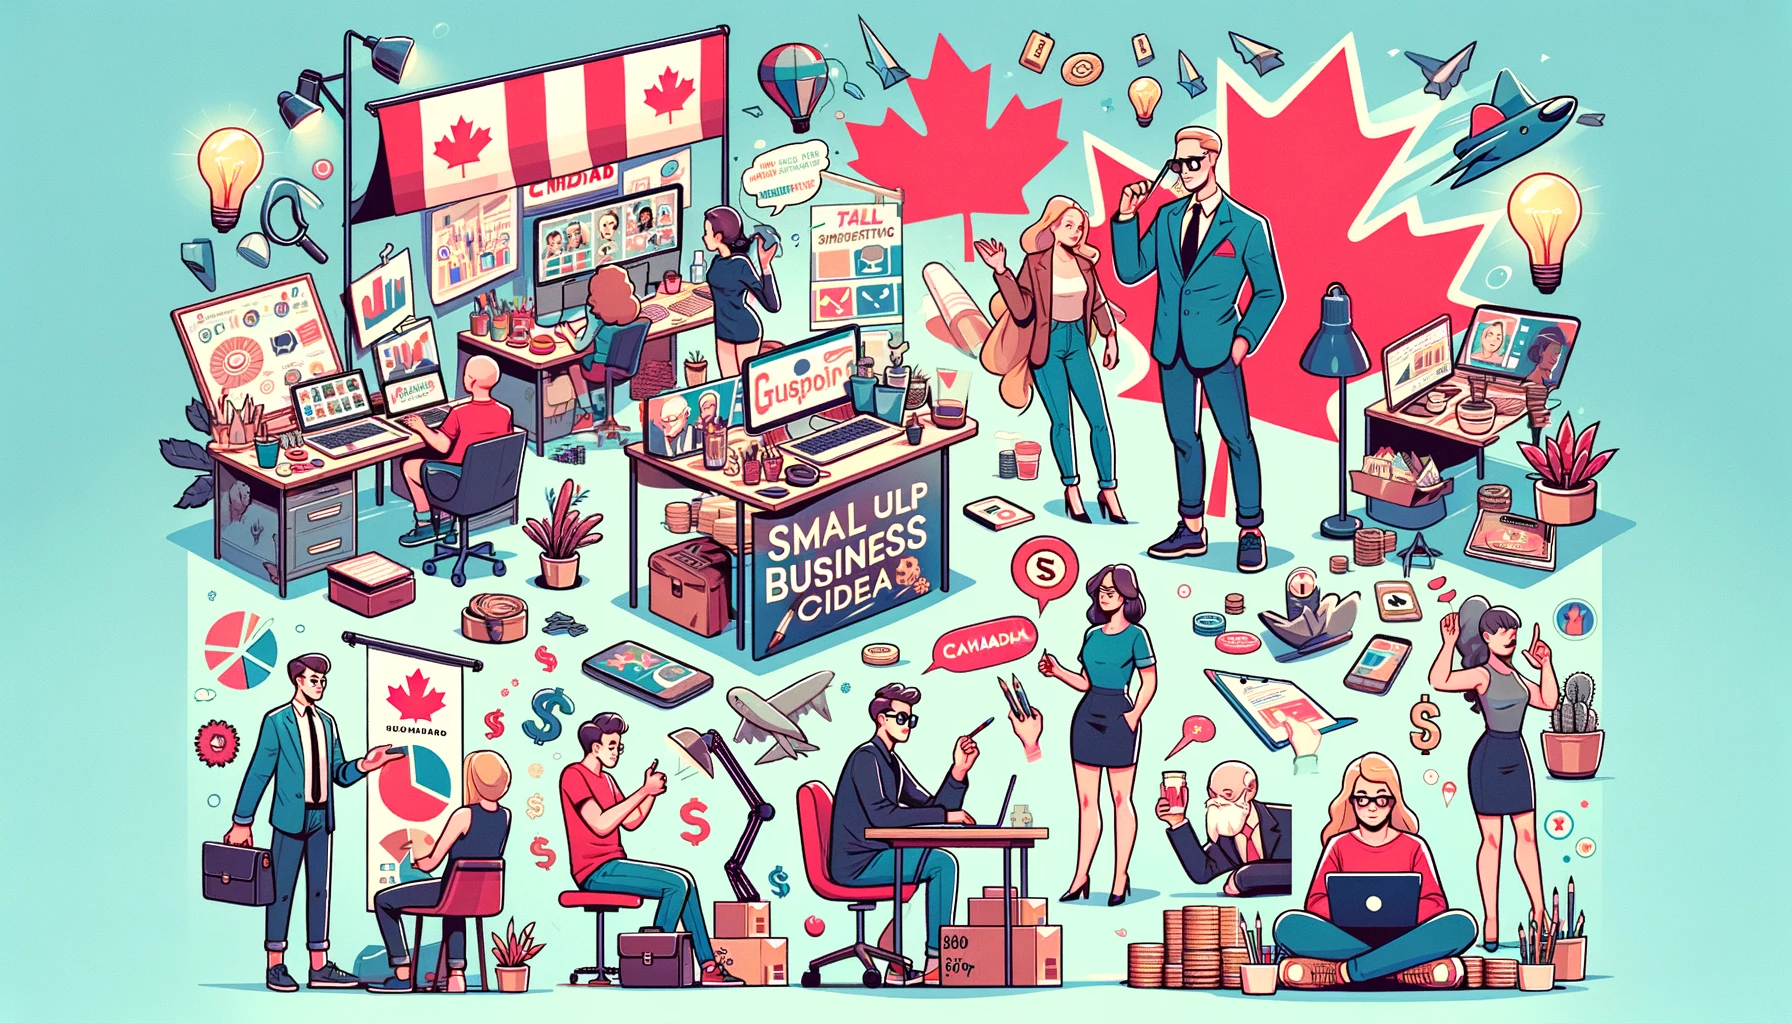 Various business ideas illustrated with Canadian flags in the background